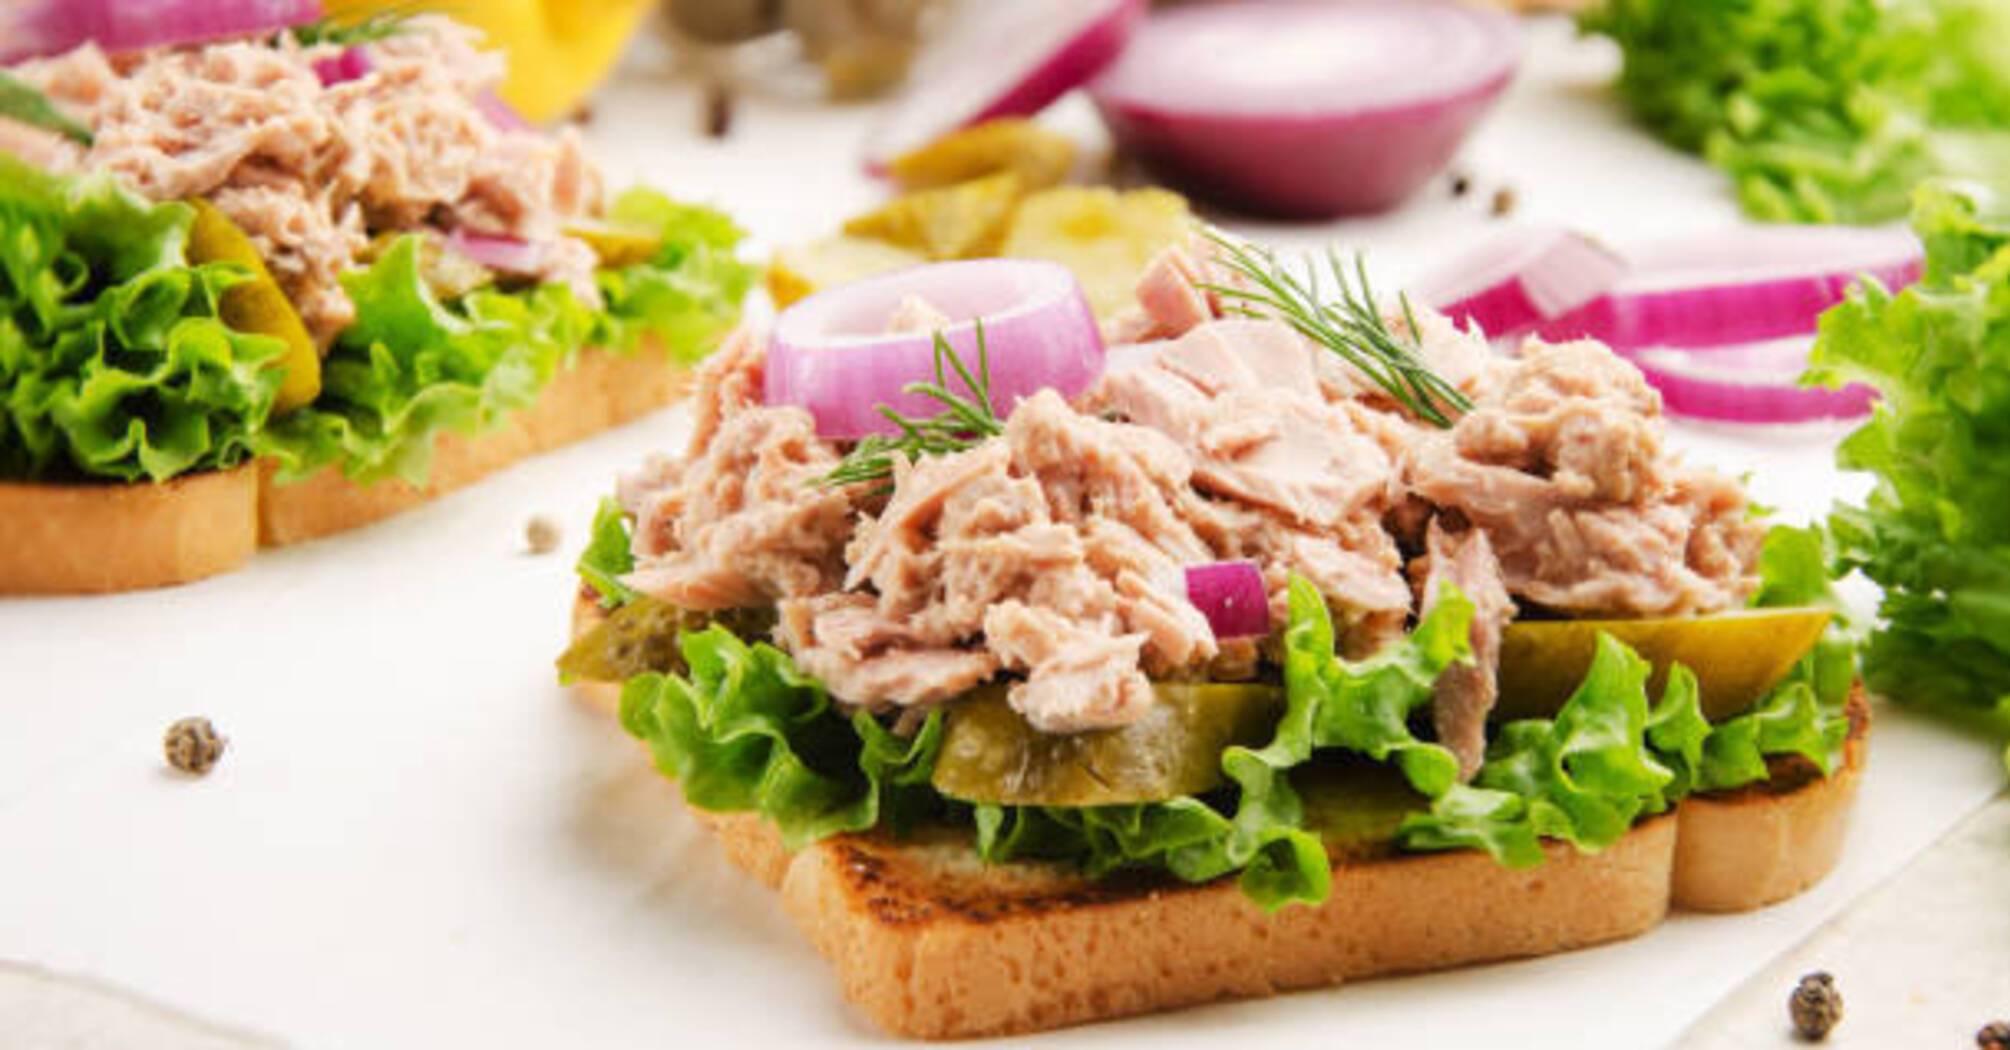 Salad and spread at the same time: what to cook with tuna